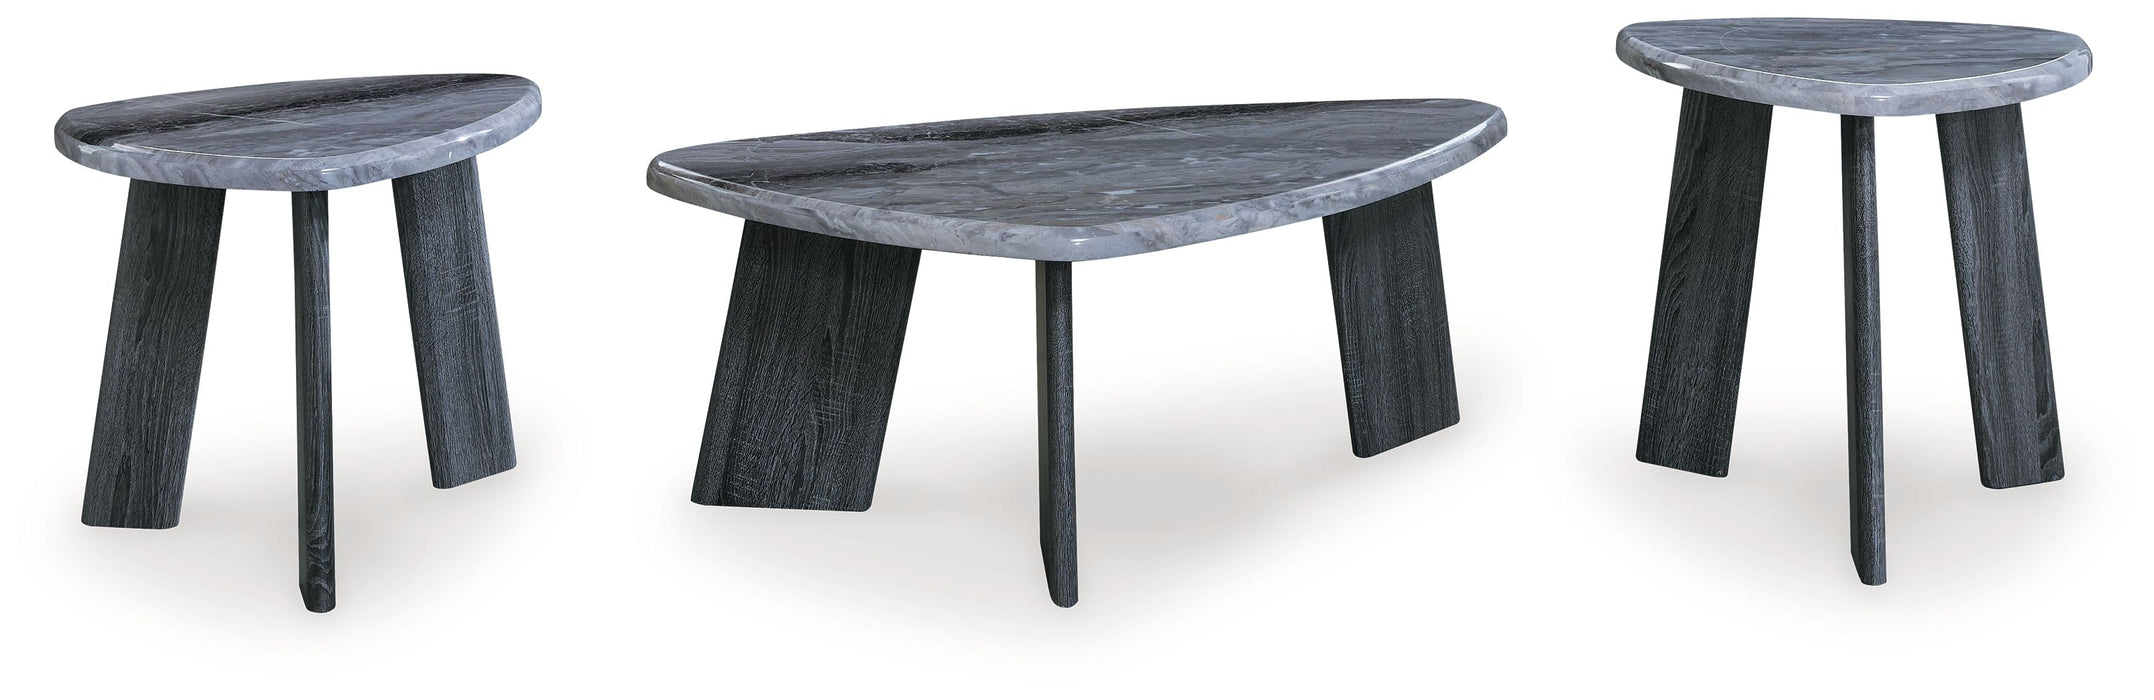 Bluebond - Gray - Occasional Table Set (Set of 3)